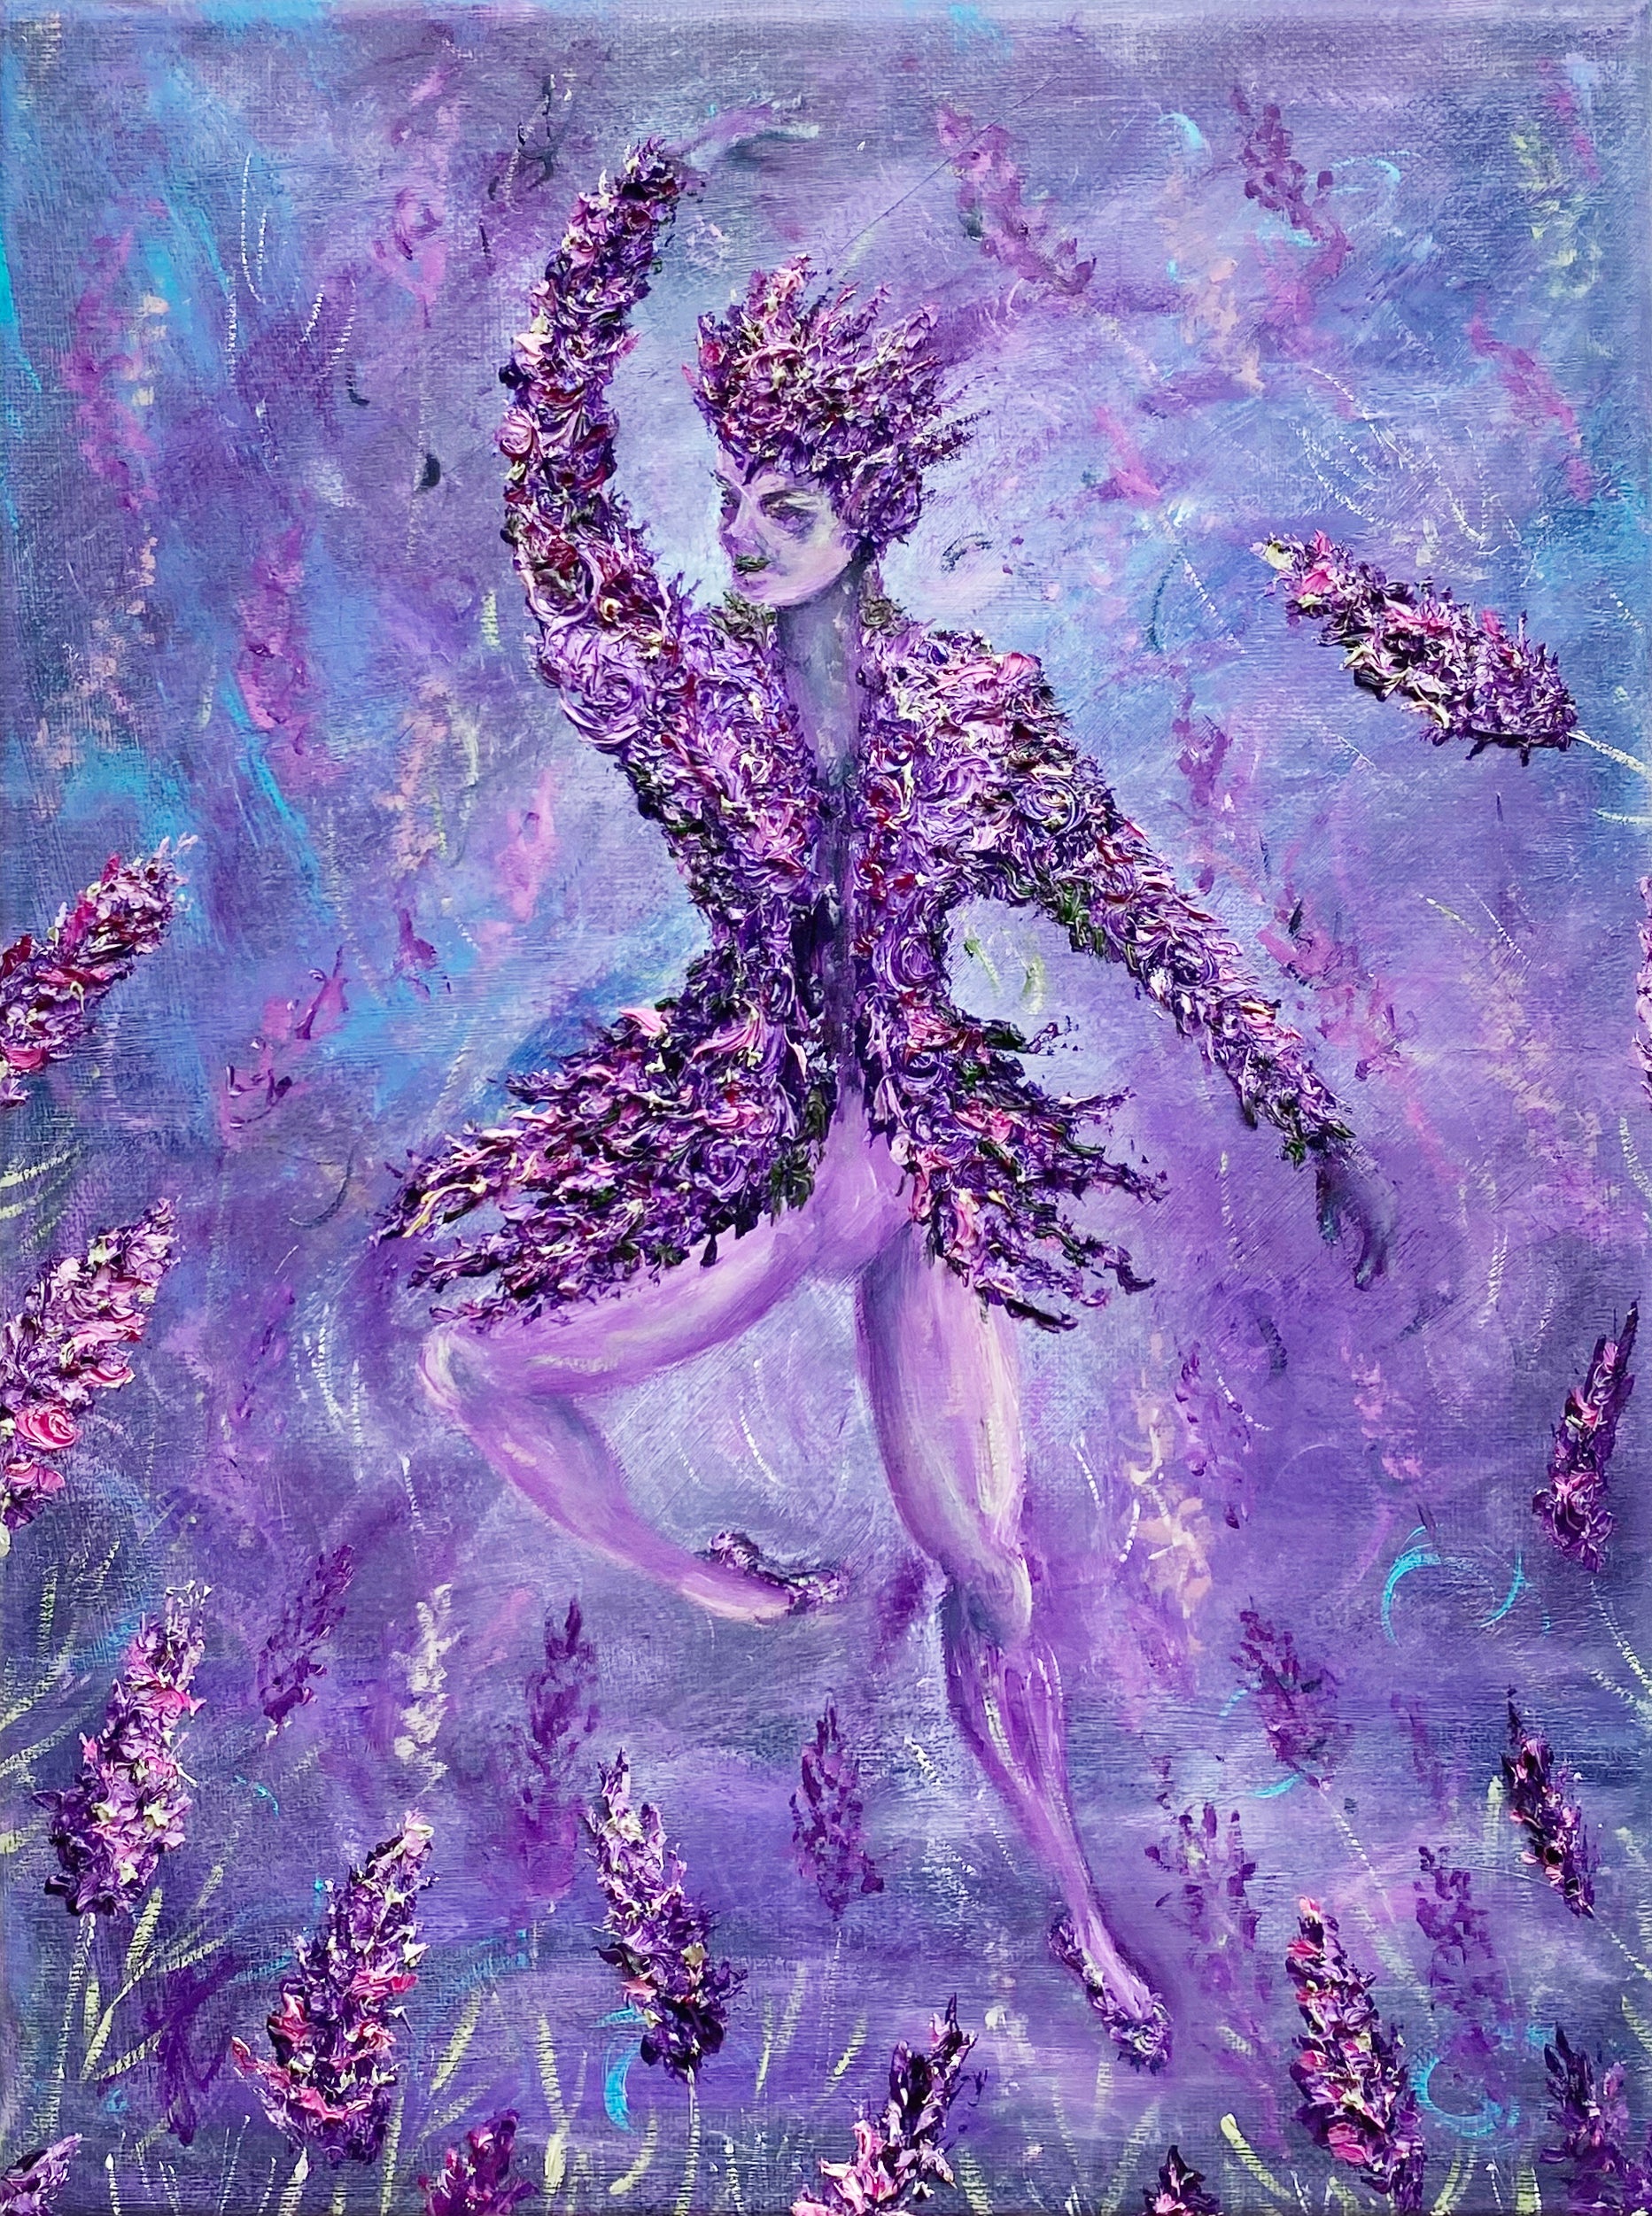 Textured danseur in lavender costume painted against purple background with textured lavender blooms